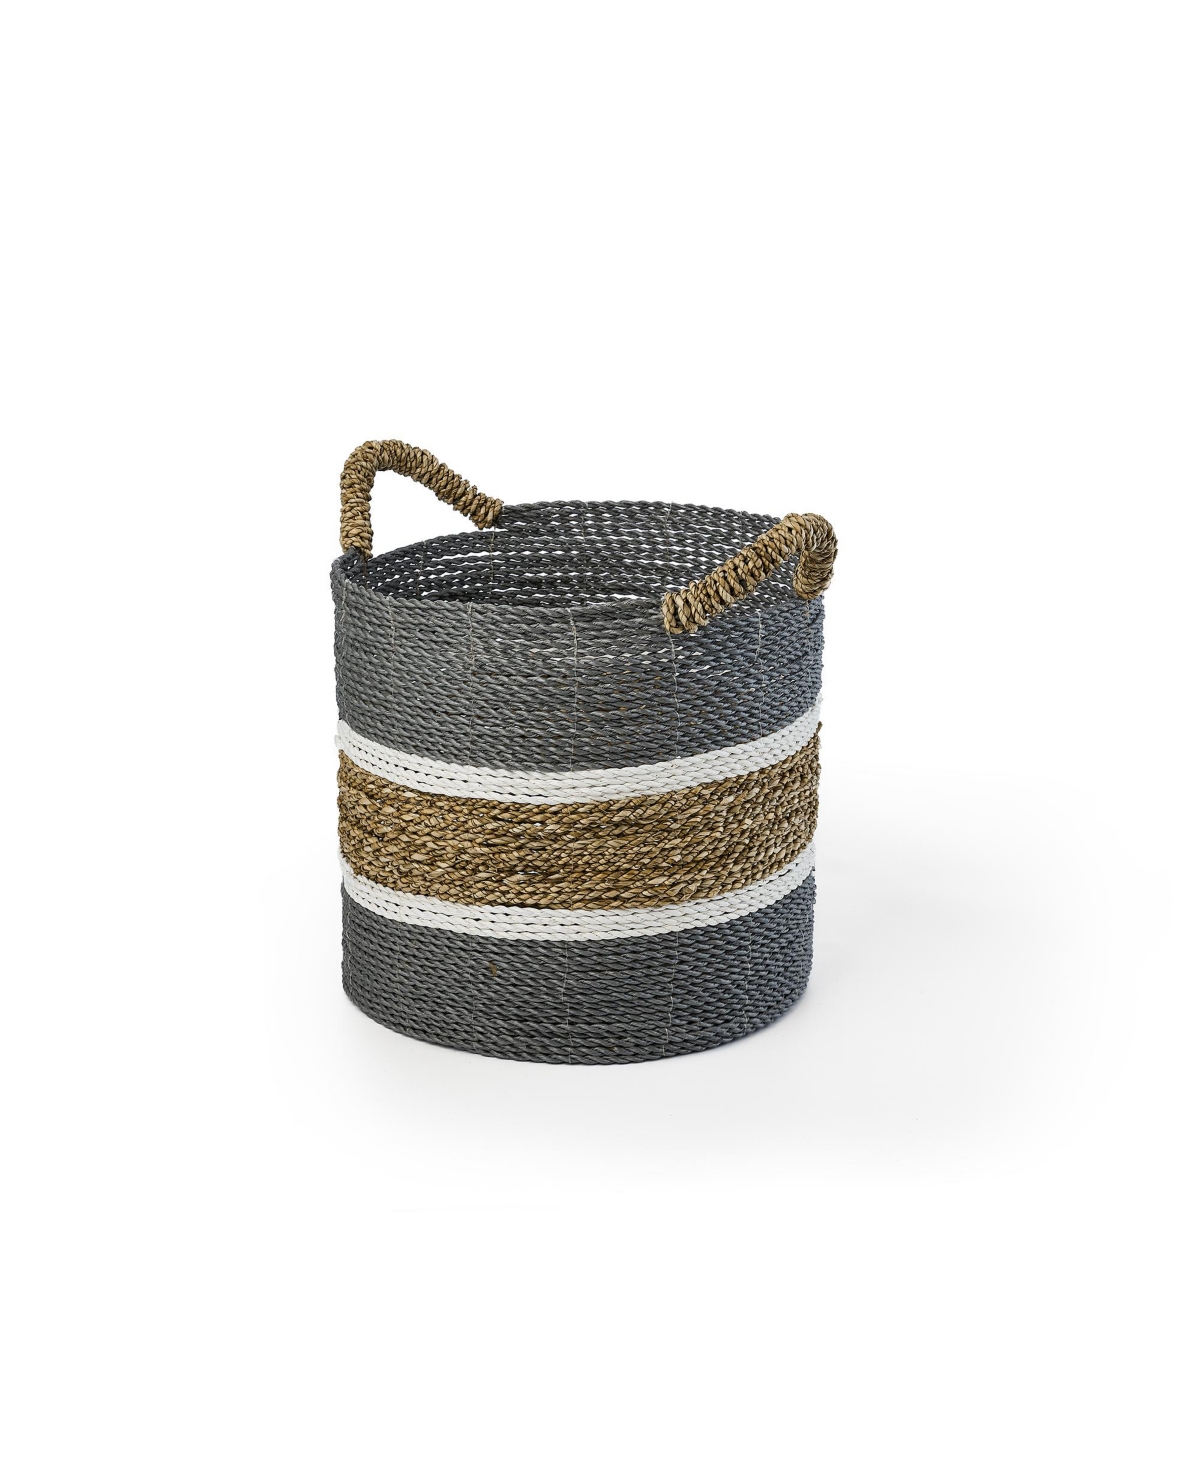 Shop Baum 3 Piece Round Sea Grass And Raffia Basket Set With Ear Handles In Gray And Tan